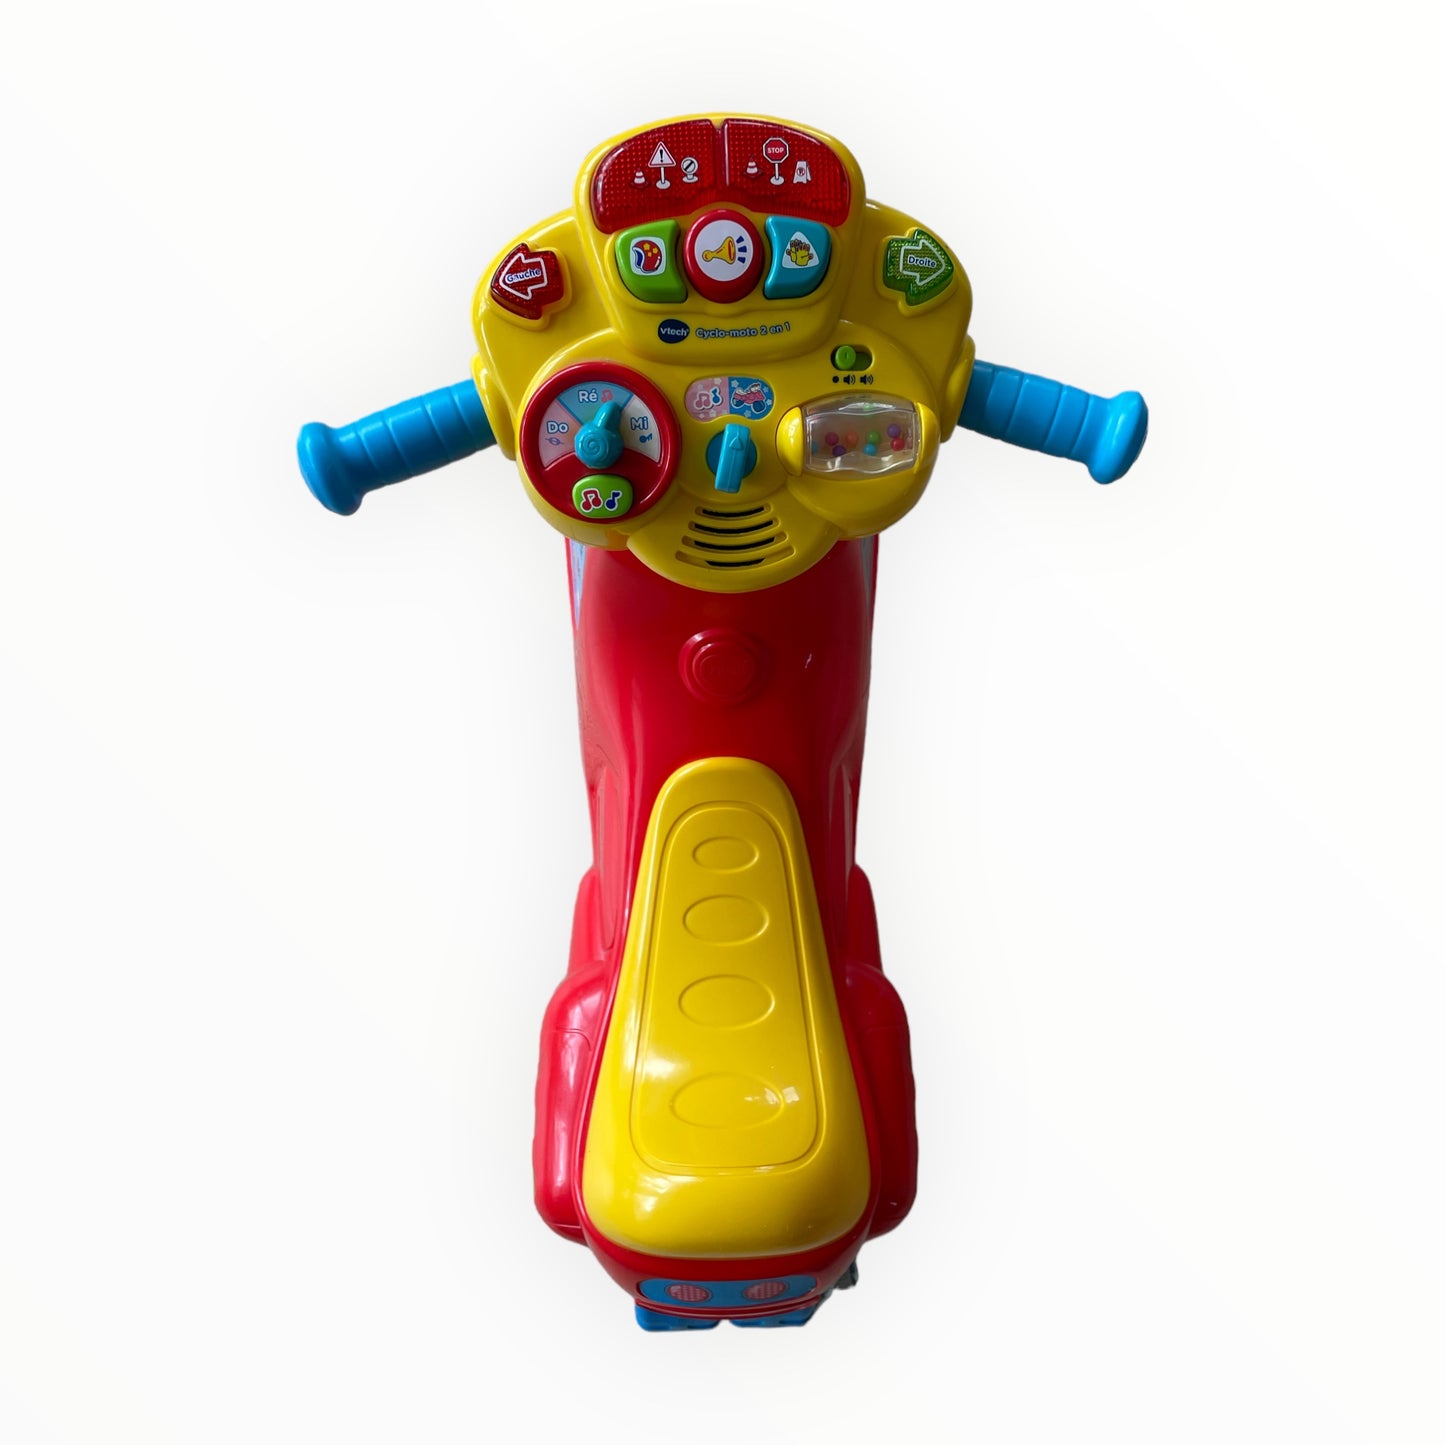 VTech Baby - 2-in-1 Motorcycle